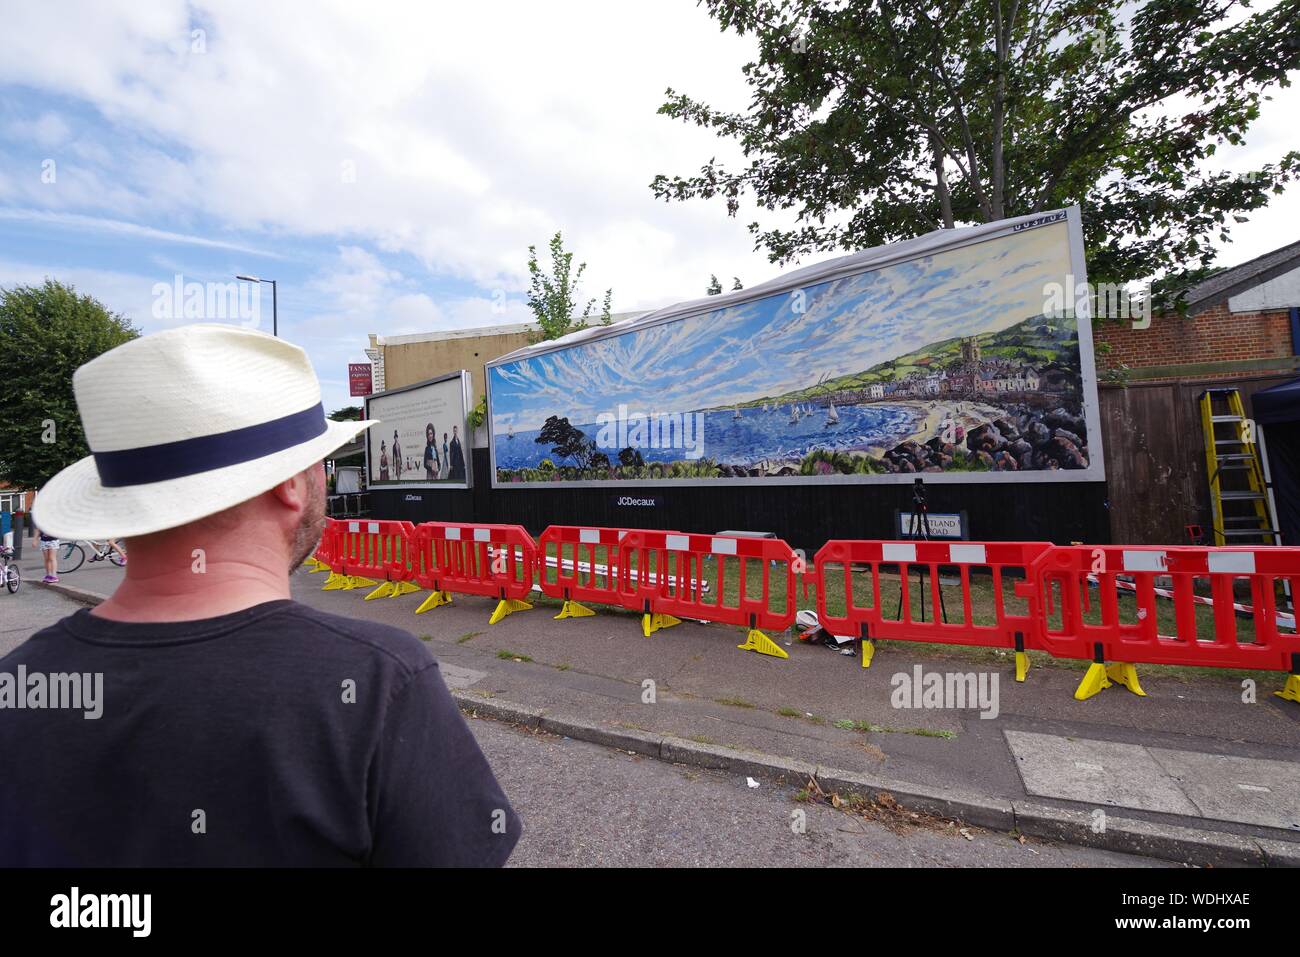 British artist David Downes has been commissioned by ITV to create a large-scale public mural in Bournemouth in conjunction with the  launch of their 2019 drama Sanditon in August 2019. Painting publicly for 5 days, and here on day 5, Downes is recreating an illustrated version of the poster artwork for Sanditon, on a giant billboard in the UK’s coastal town, to reﬂect the seaside location of the drama. The installation will remain in situ for three weeks after its completion.   David Downes is a landscape painter who ampliﬁes the sense of place and time through the lens of autism. Stock Photo